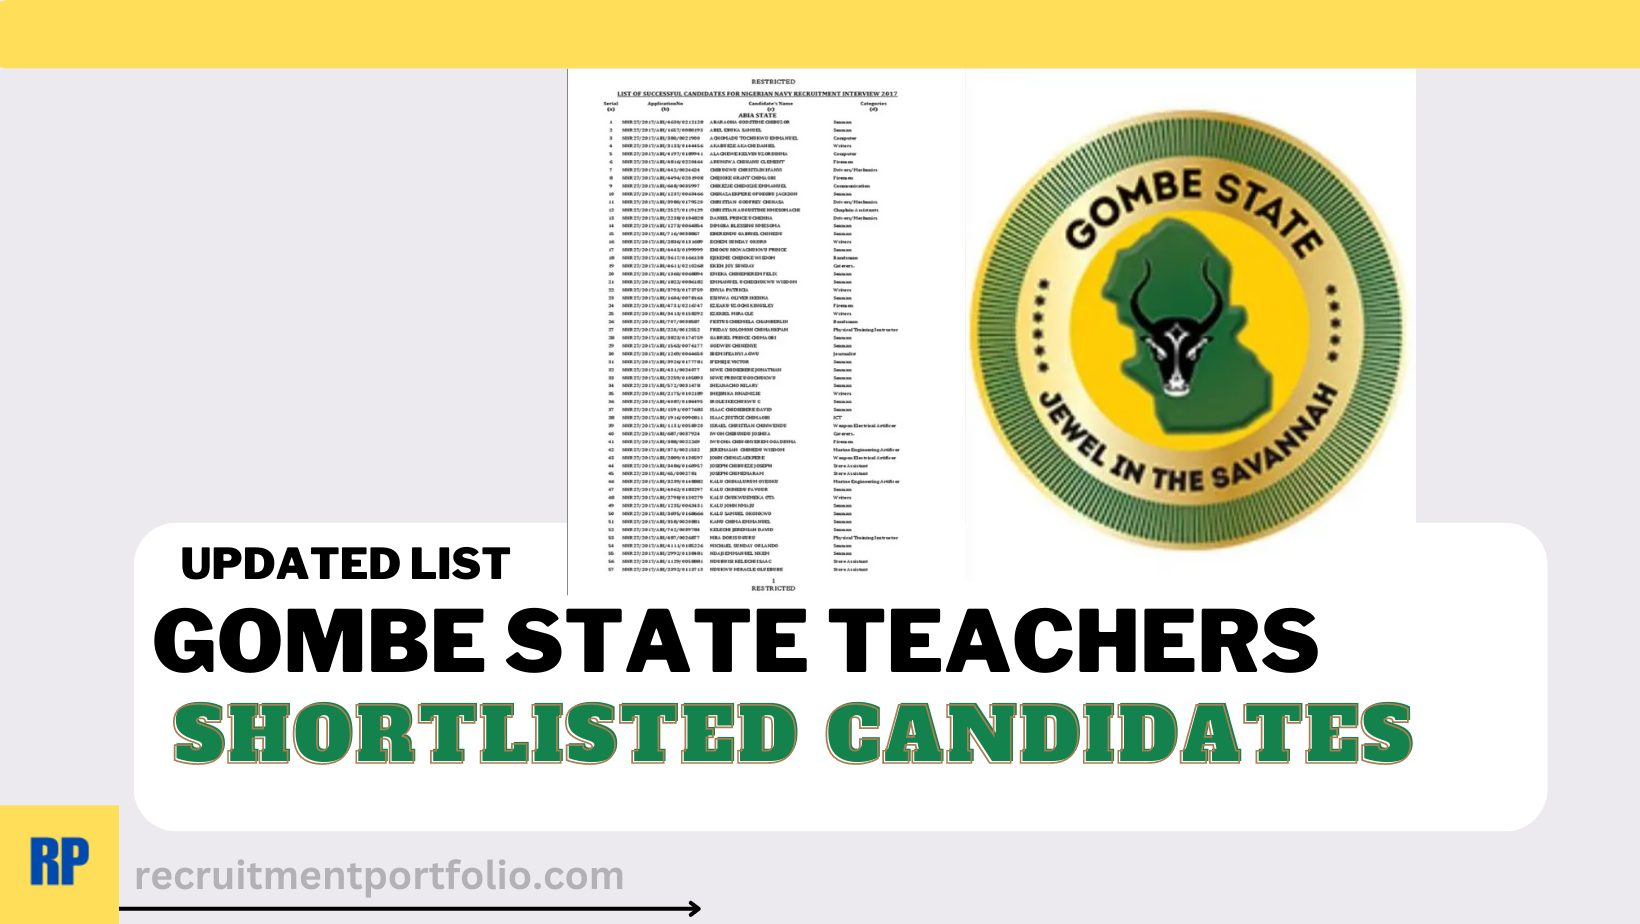 Gombe State Teachers Shortlisted Candidates